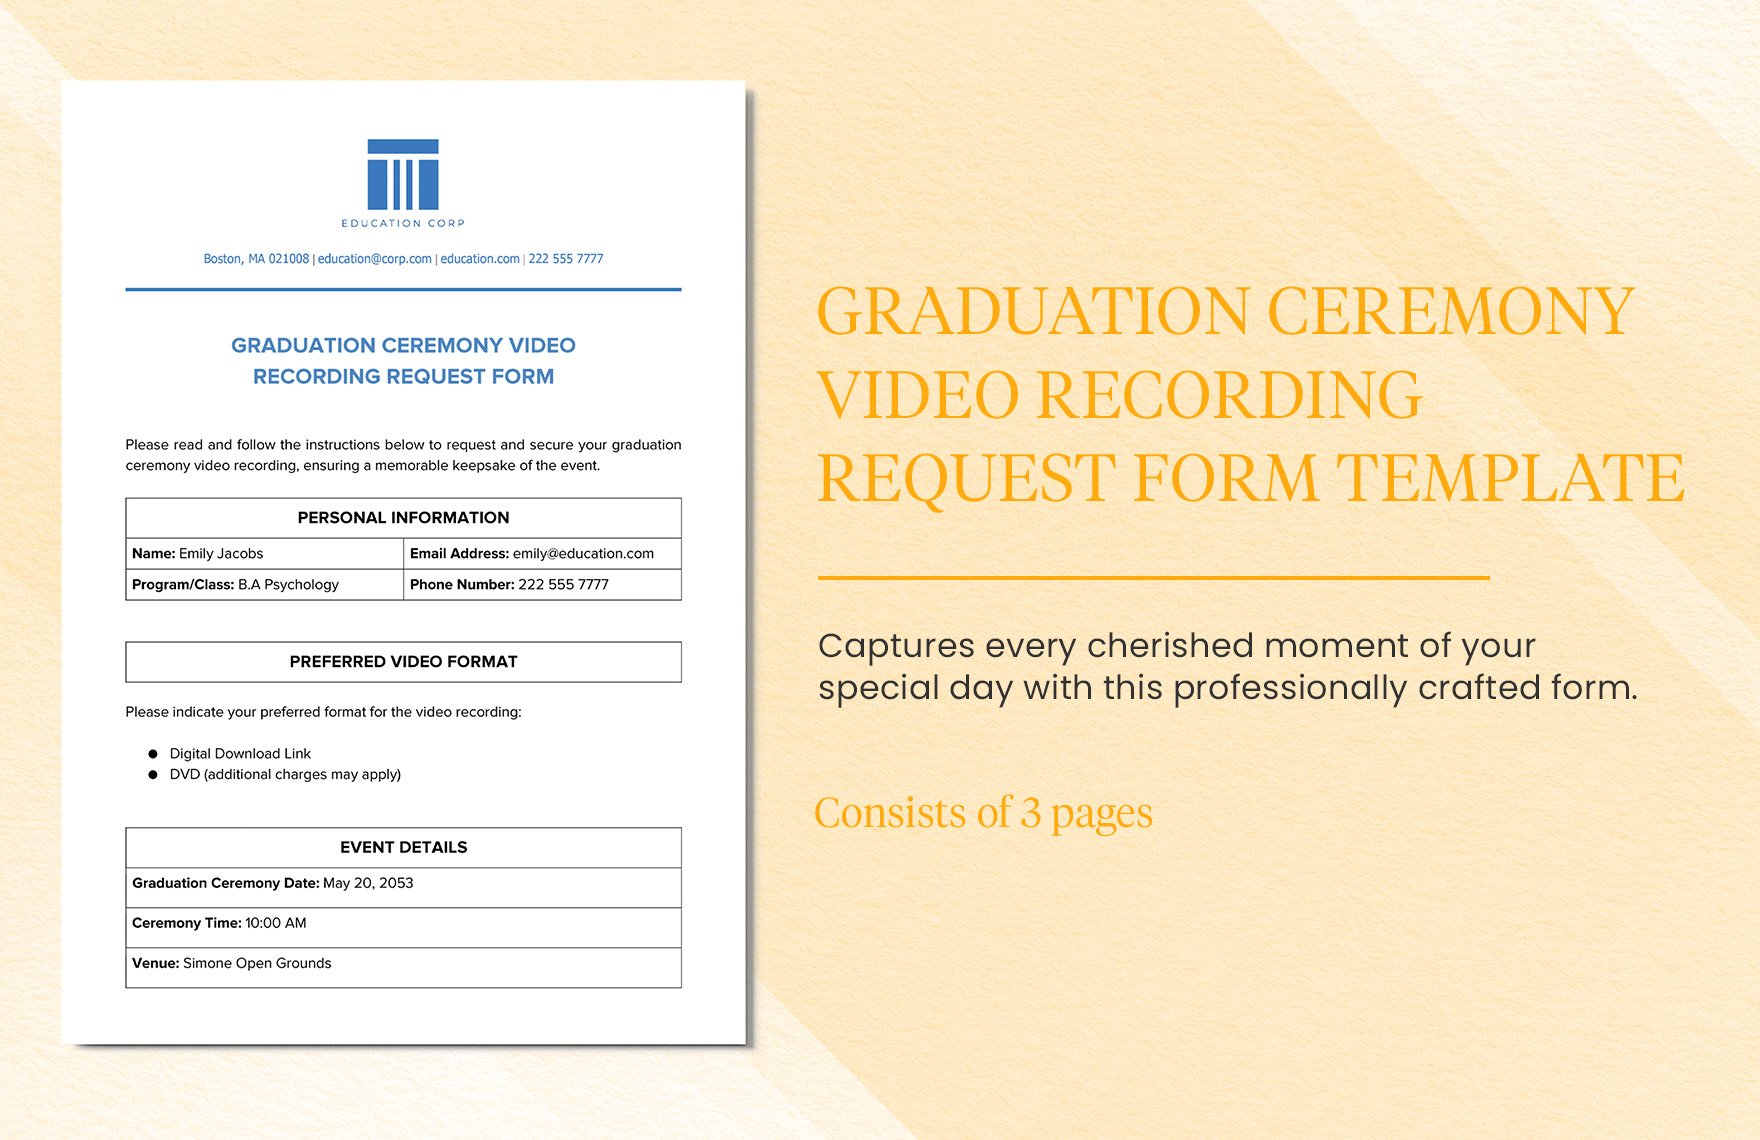 Graduation Ceremony Video Recording Request Form Template in Word, Google Docs, PDF